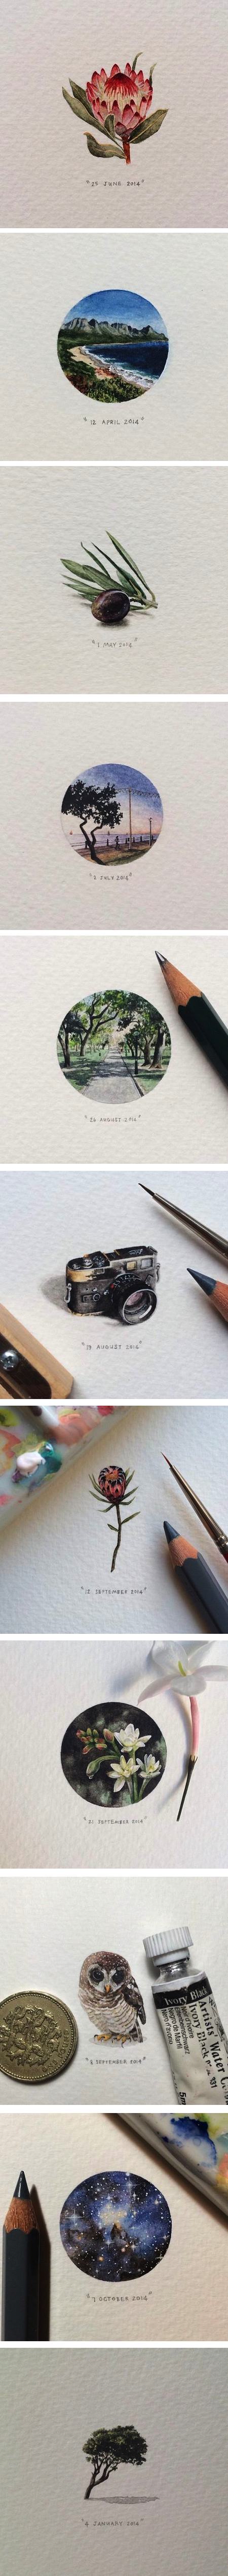 365 Postcards for Ants, miniature watercolors by Lorraine Loots